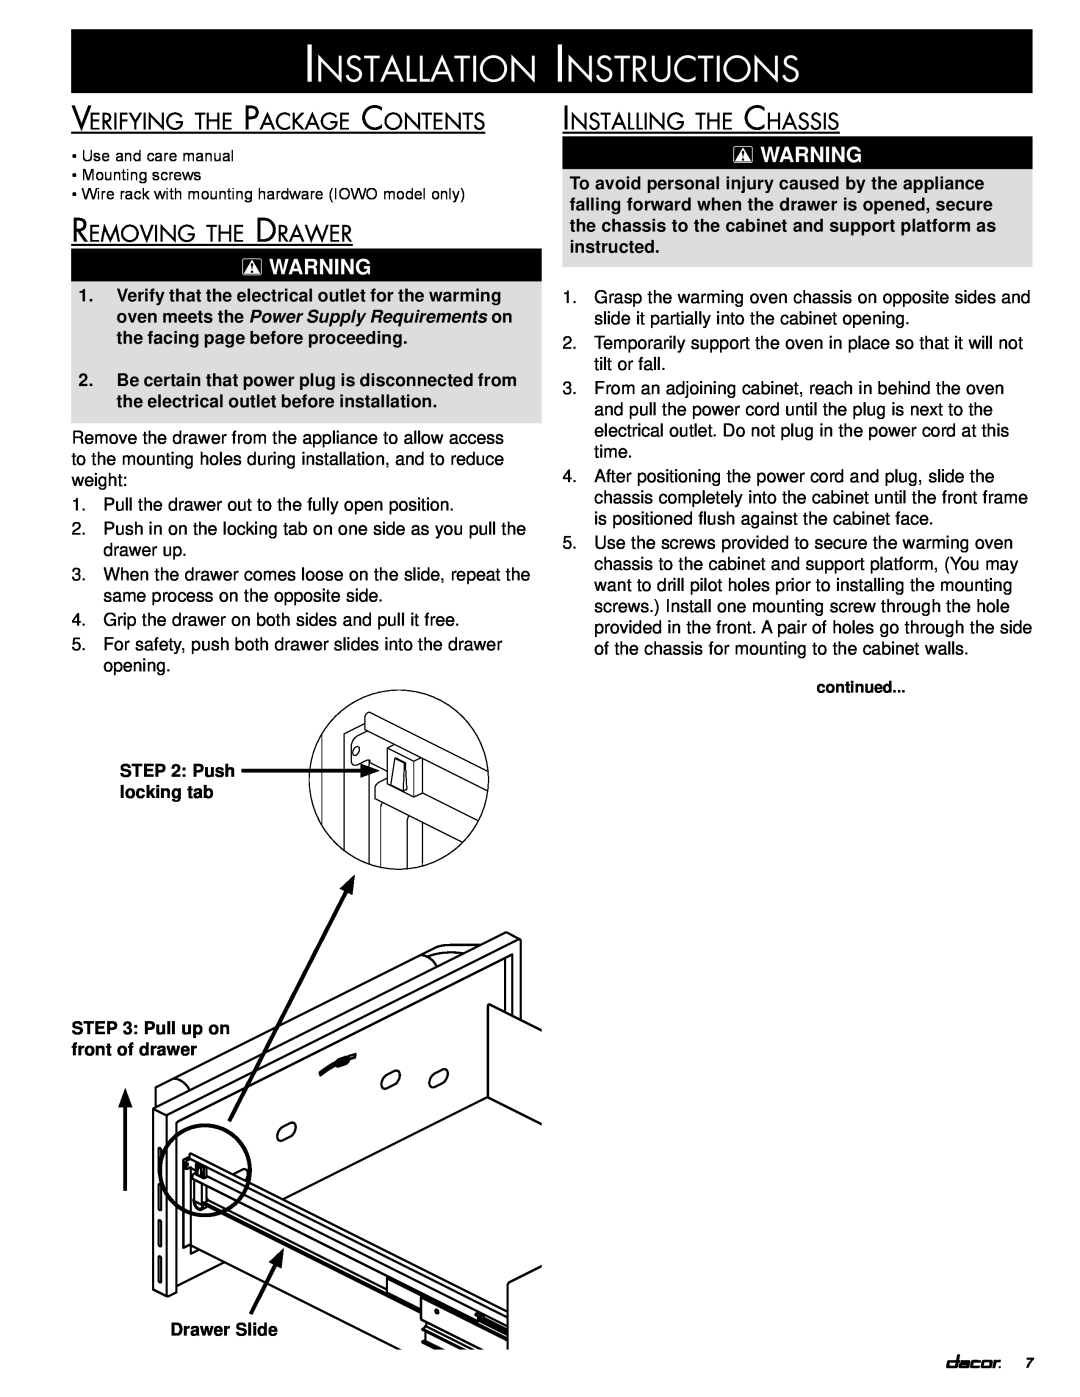 Dacor IOWO, IWO, PWO Installation Instructions, Verifying the Package Contents, Removing the Drawer, Installing the Chassis 